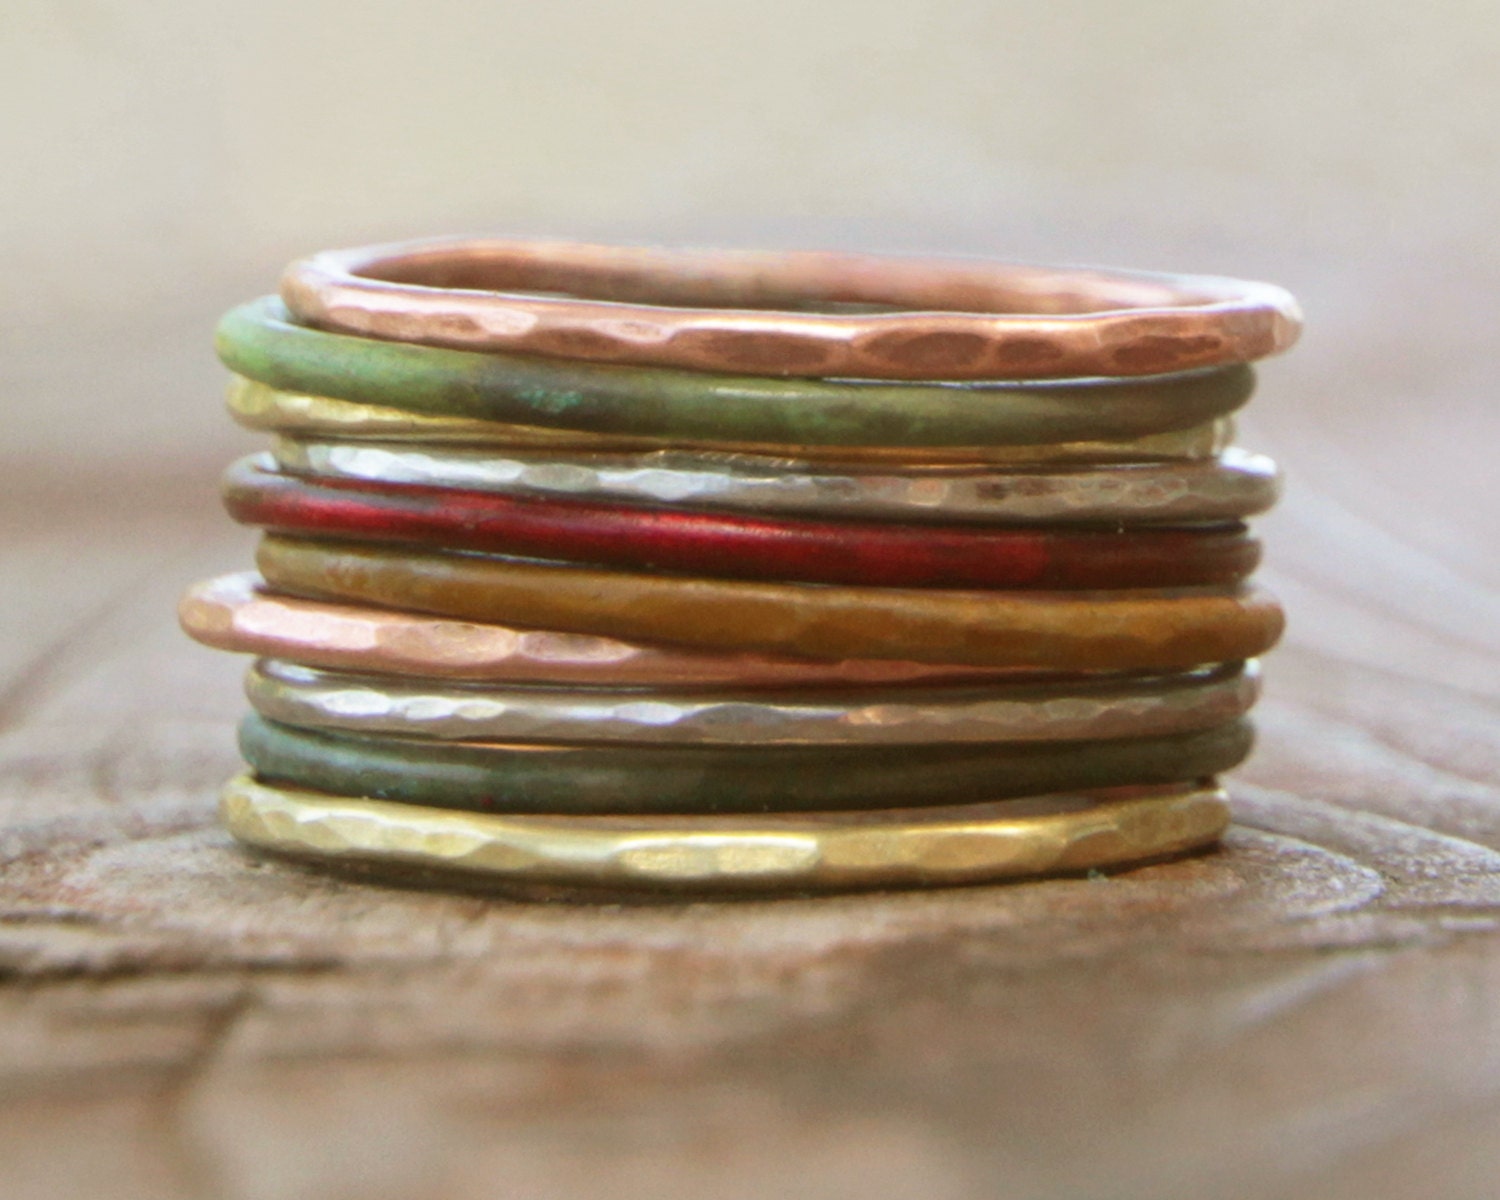 Stacking Skinny Rustic Rings Silver Gold Copper Patina Rings TEN Stacking Hammered Brushed Soldered Delicate Simple Chic Spring Fashion